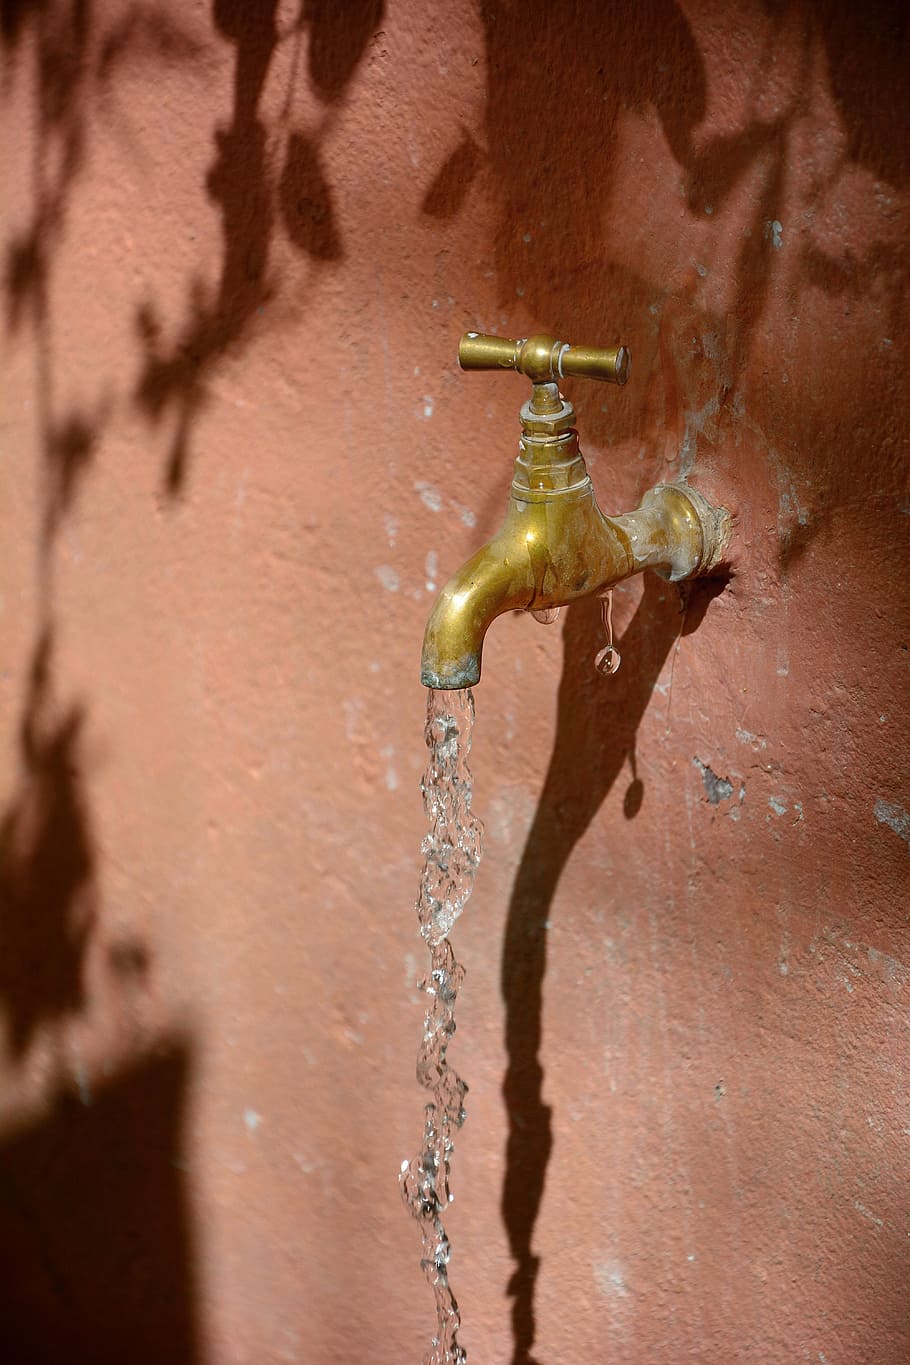 water, faucet, vintage, retro, waste, summer, holiday, life, metal, nature